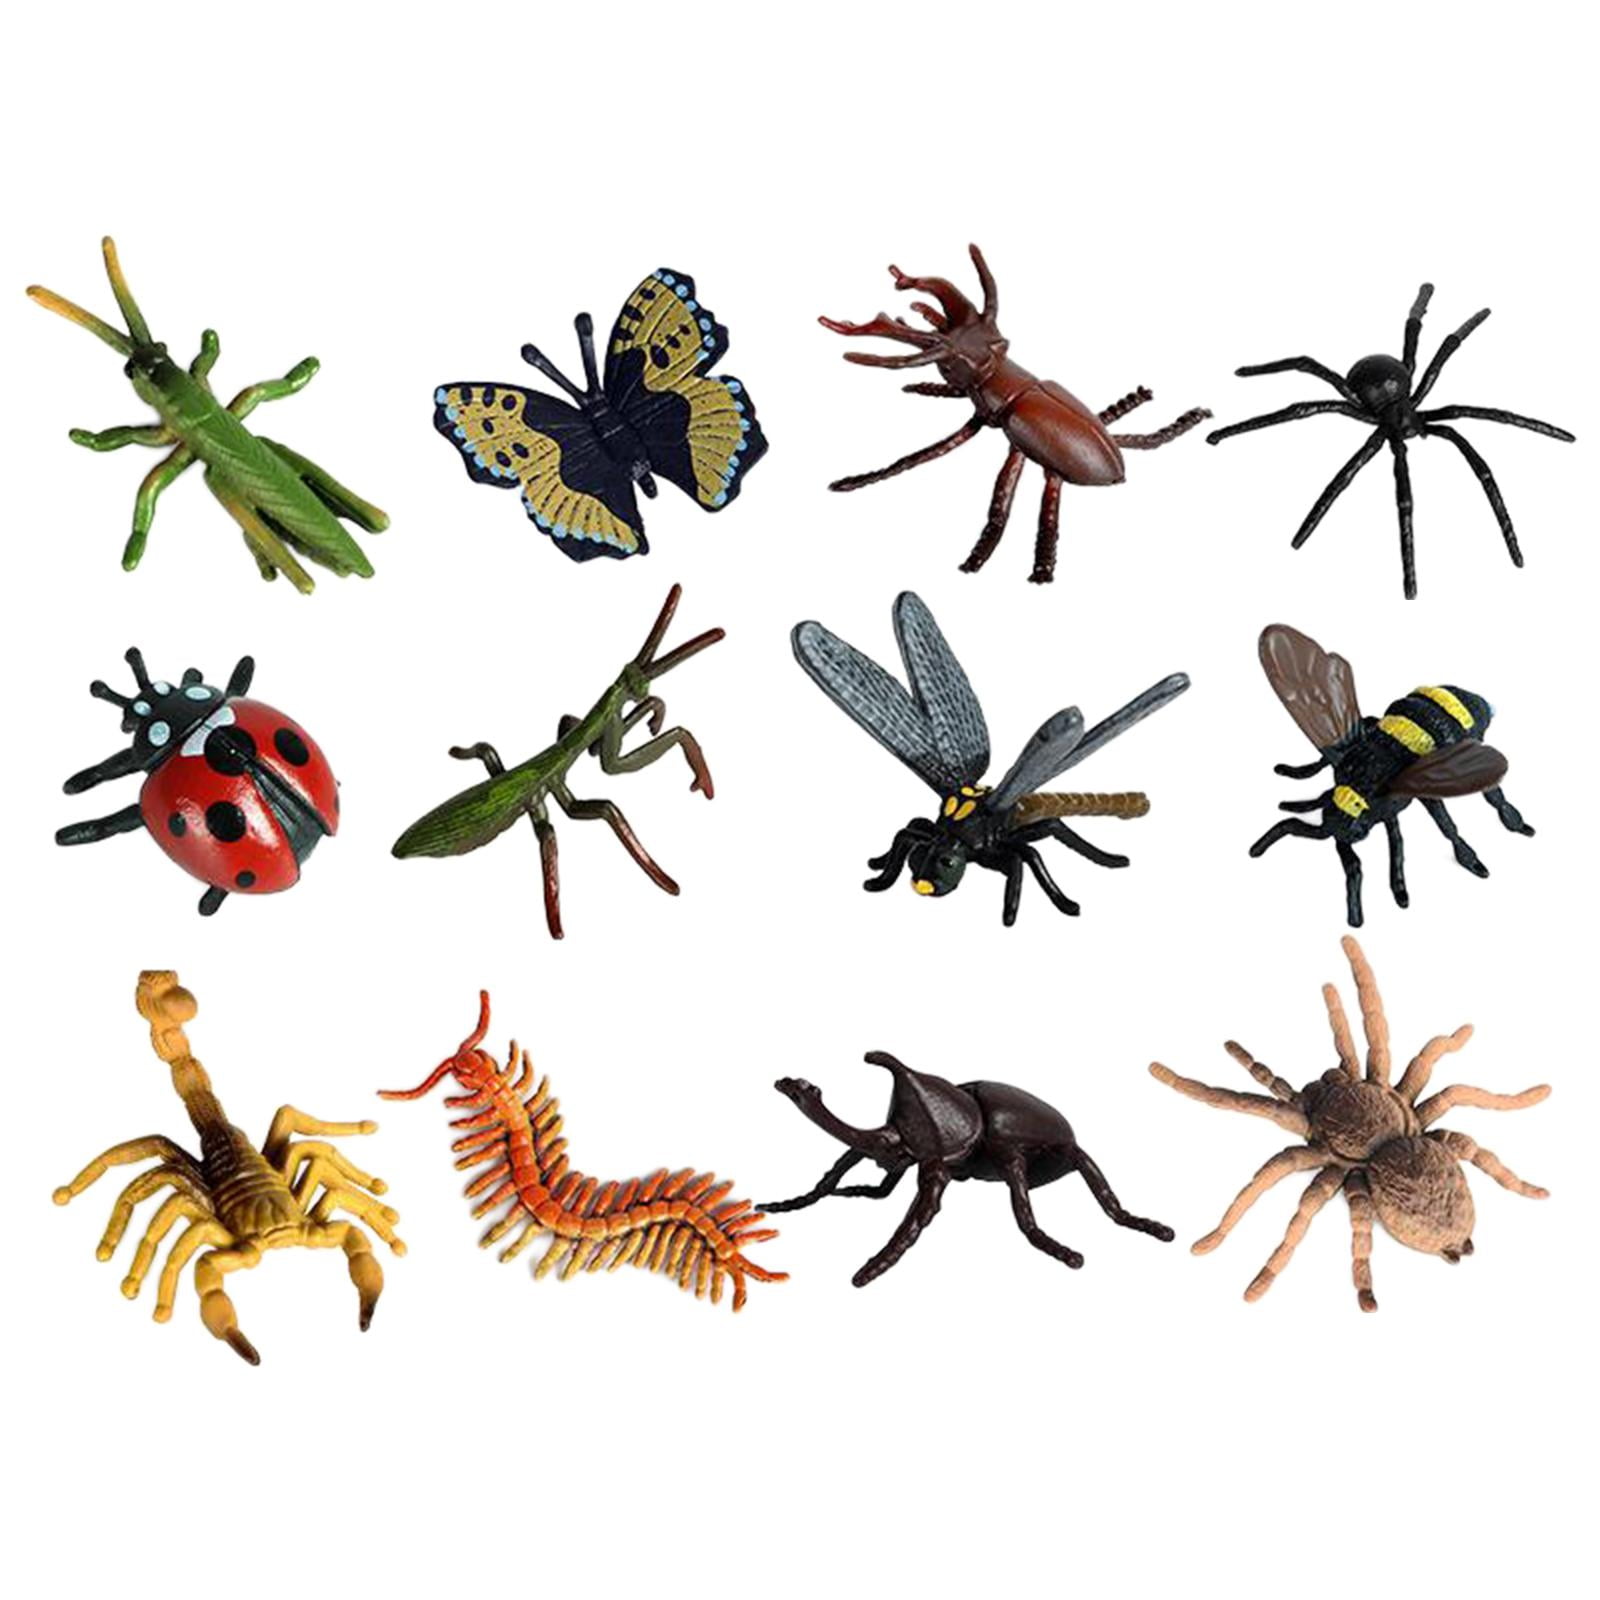 3.6" Scorpion Animal Model Figure Figurines Toy for Kids Gift Home Decor 